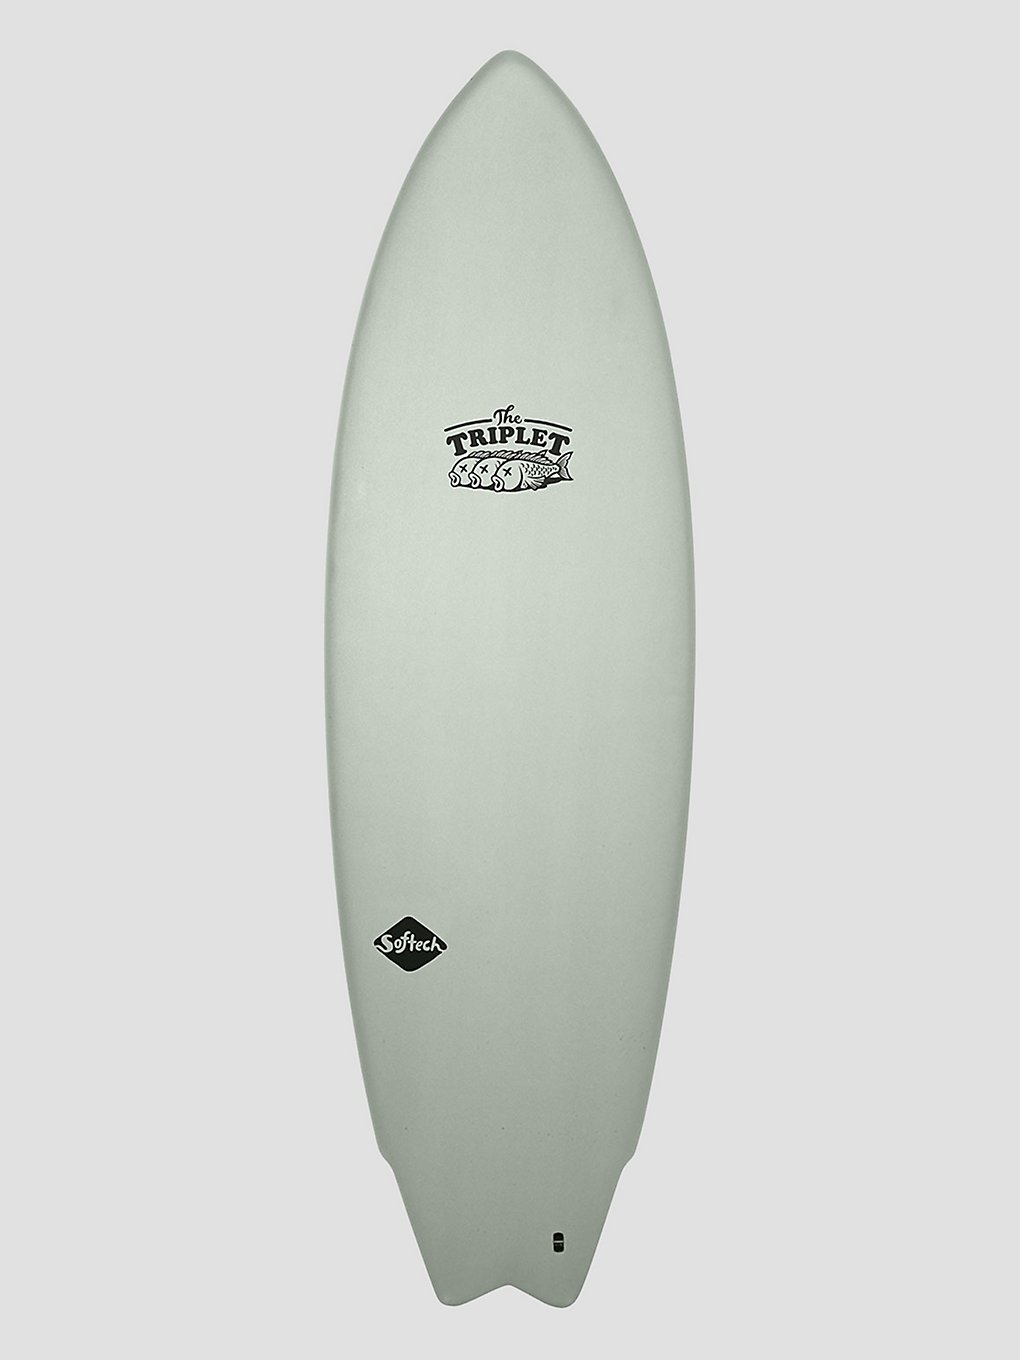 Softech The Triplet 5'8 Softtop Surfboard palm